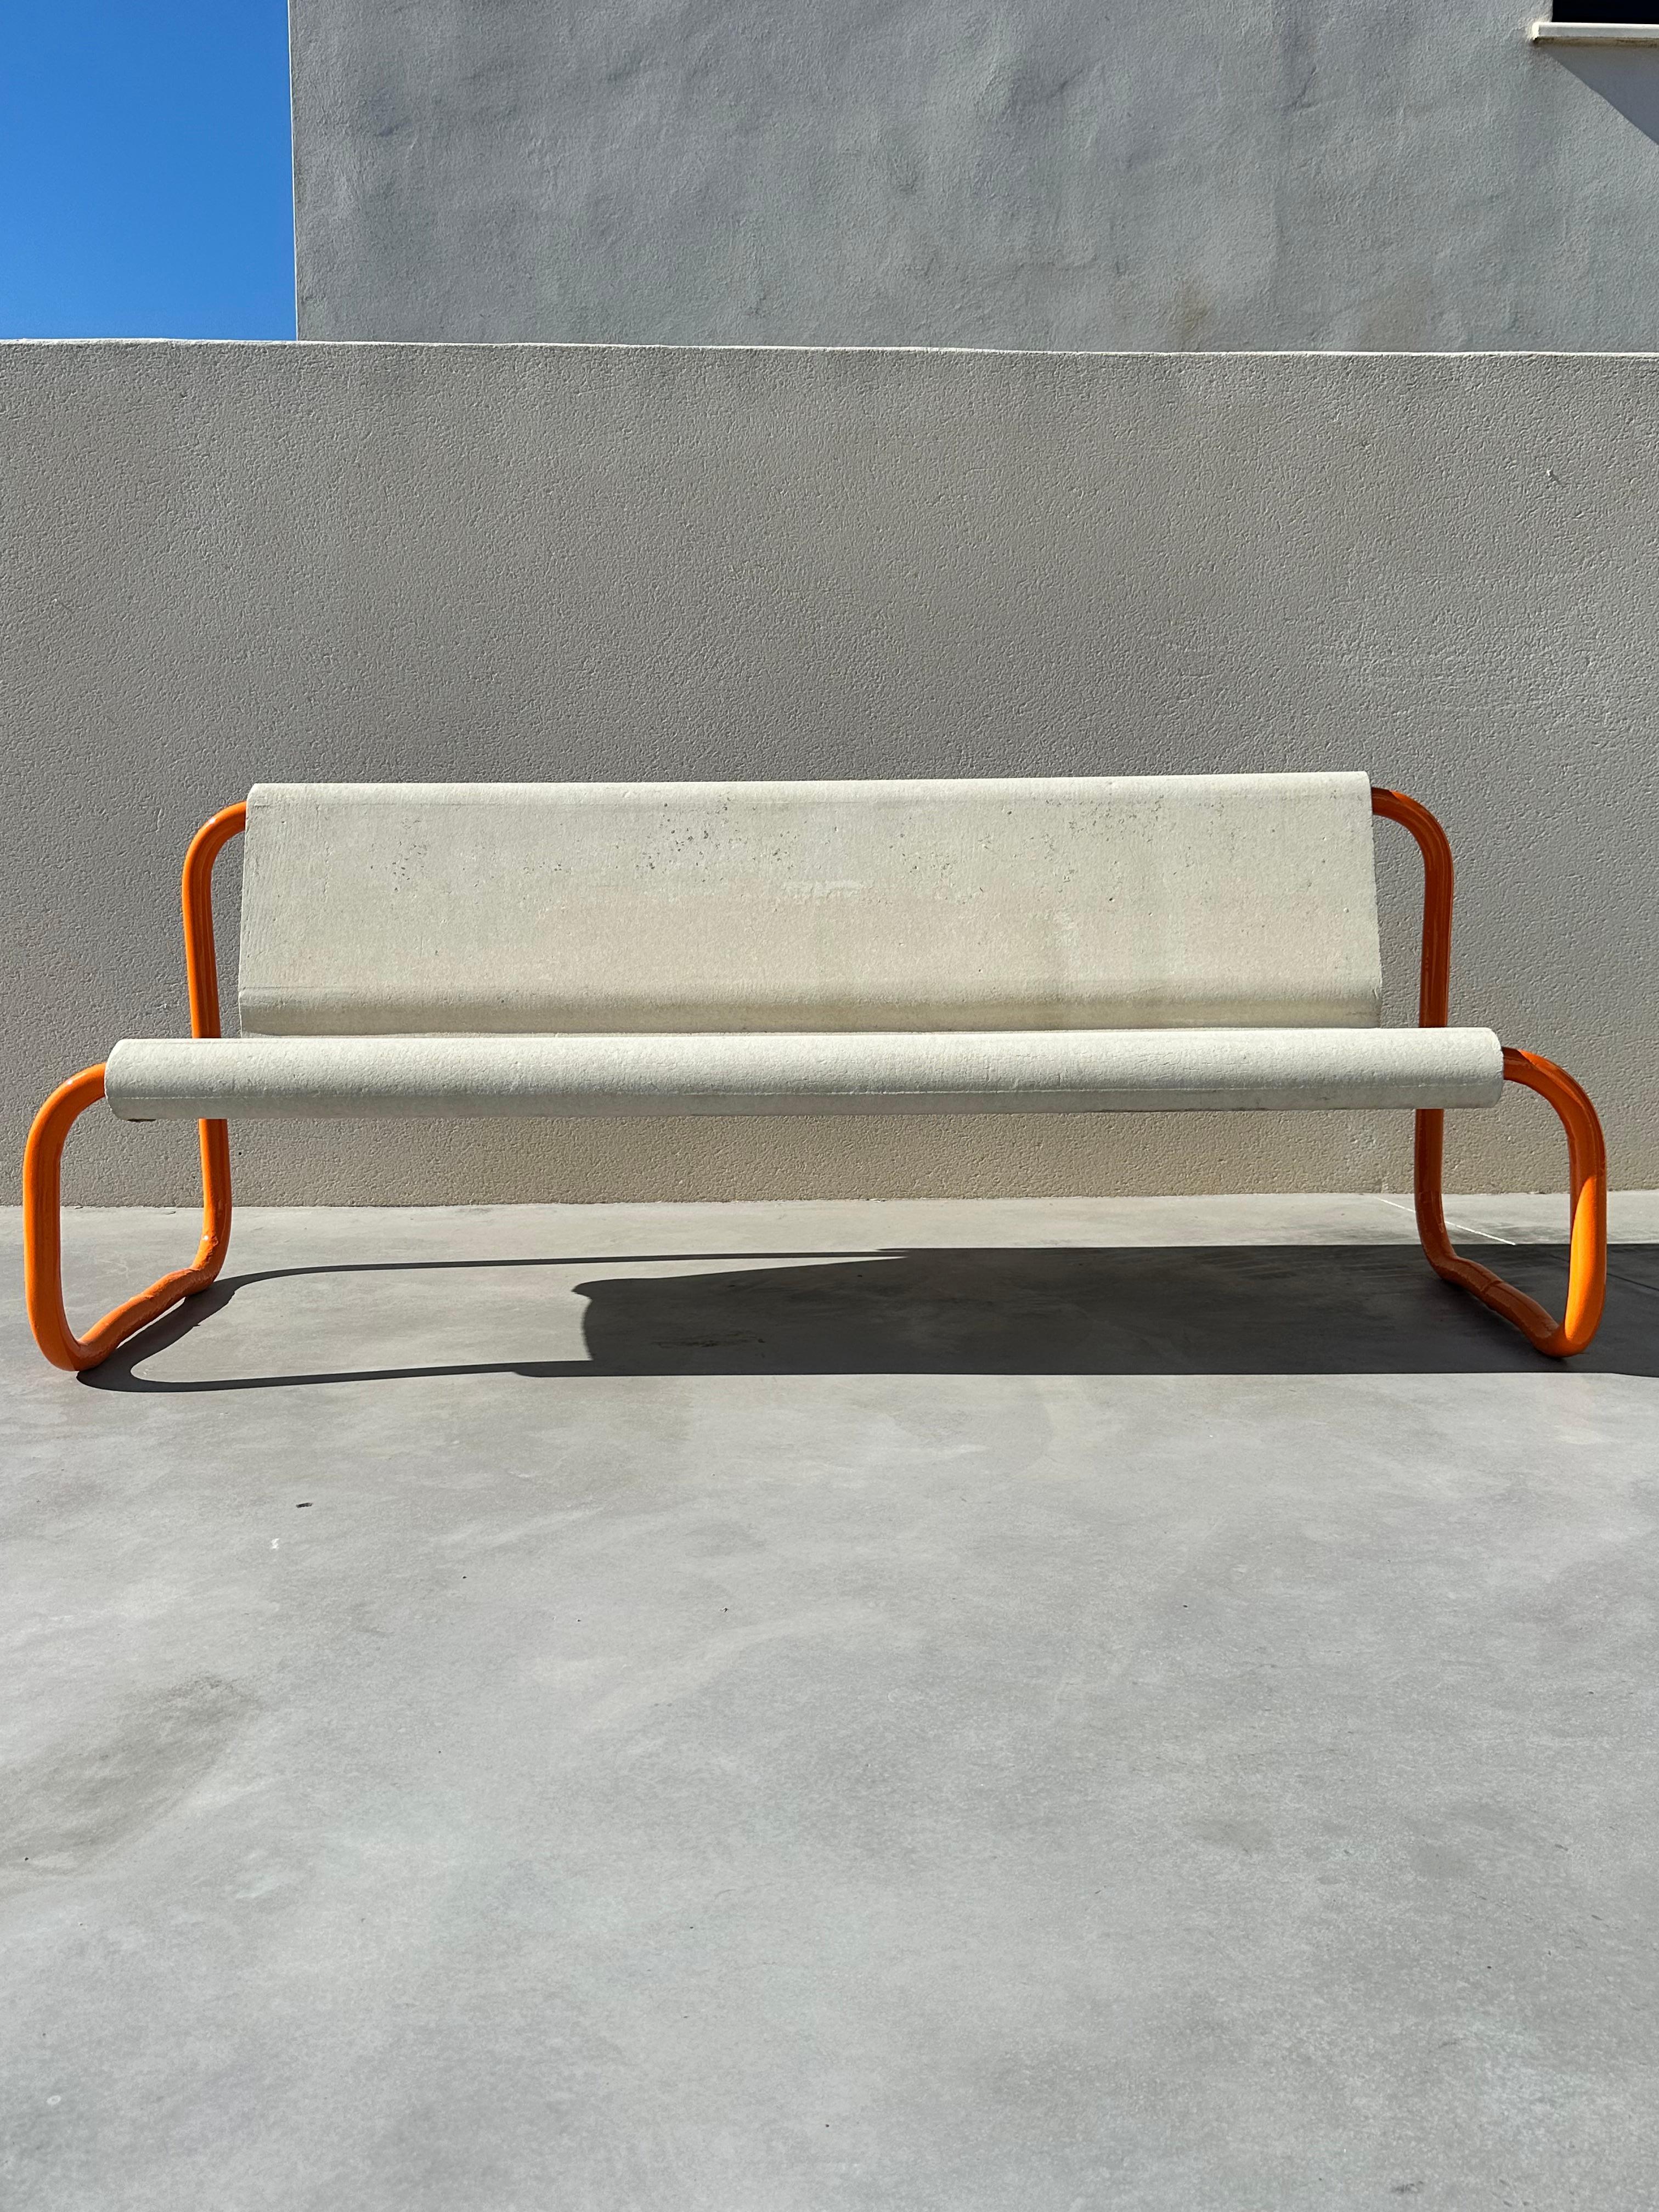 floating concrete bench seat